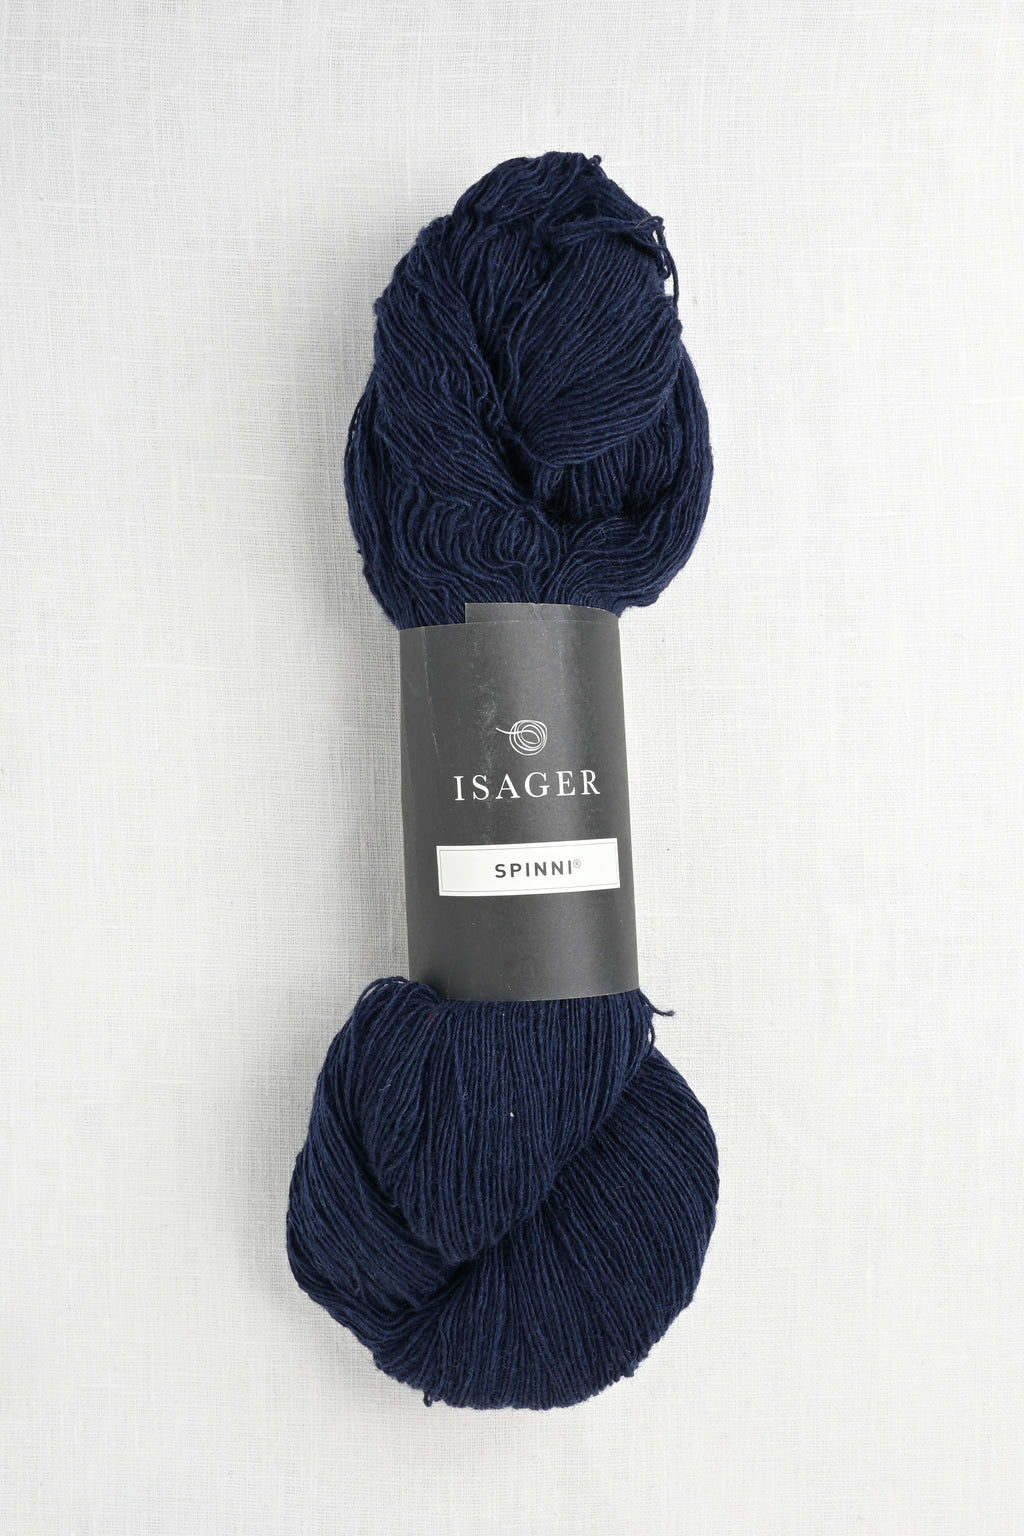 isager spinni 100 navy 100g